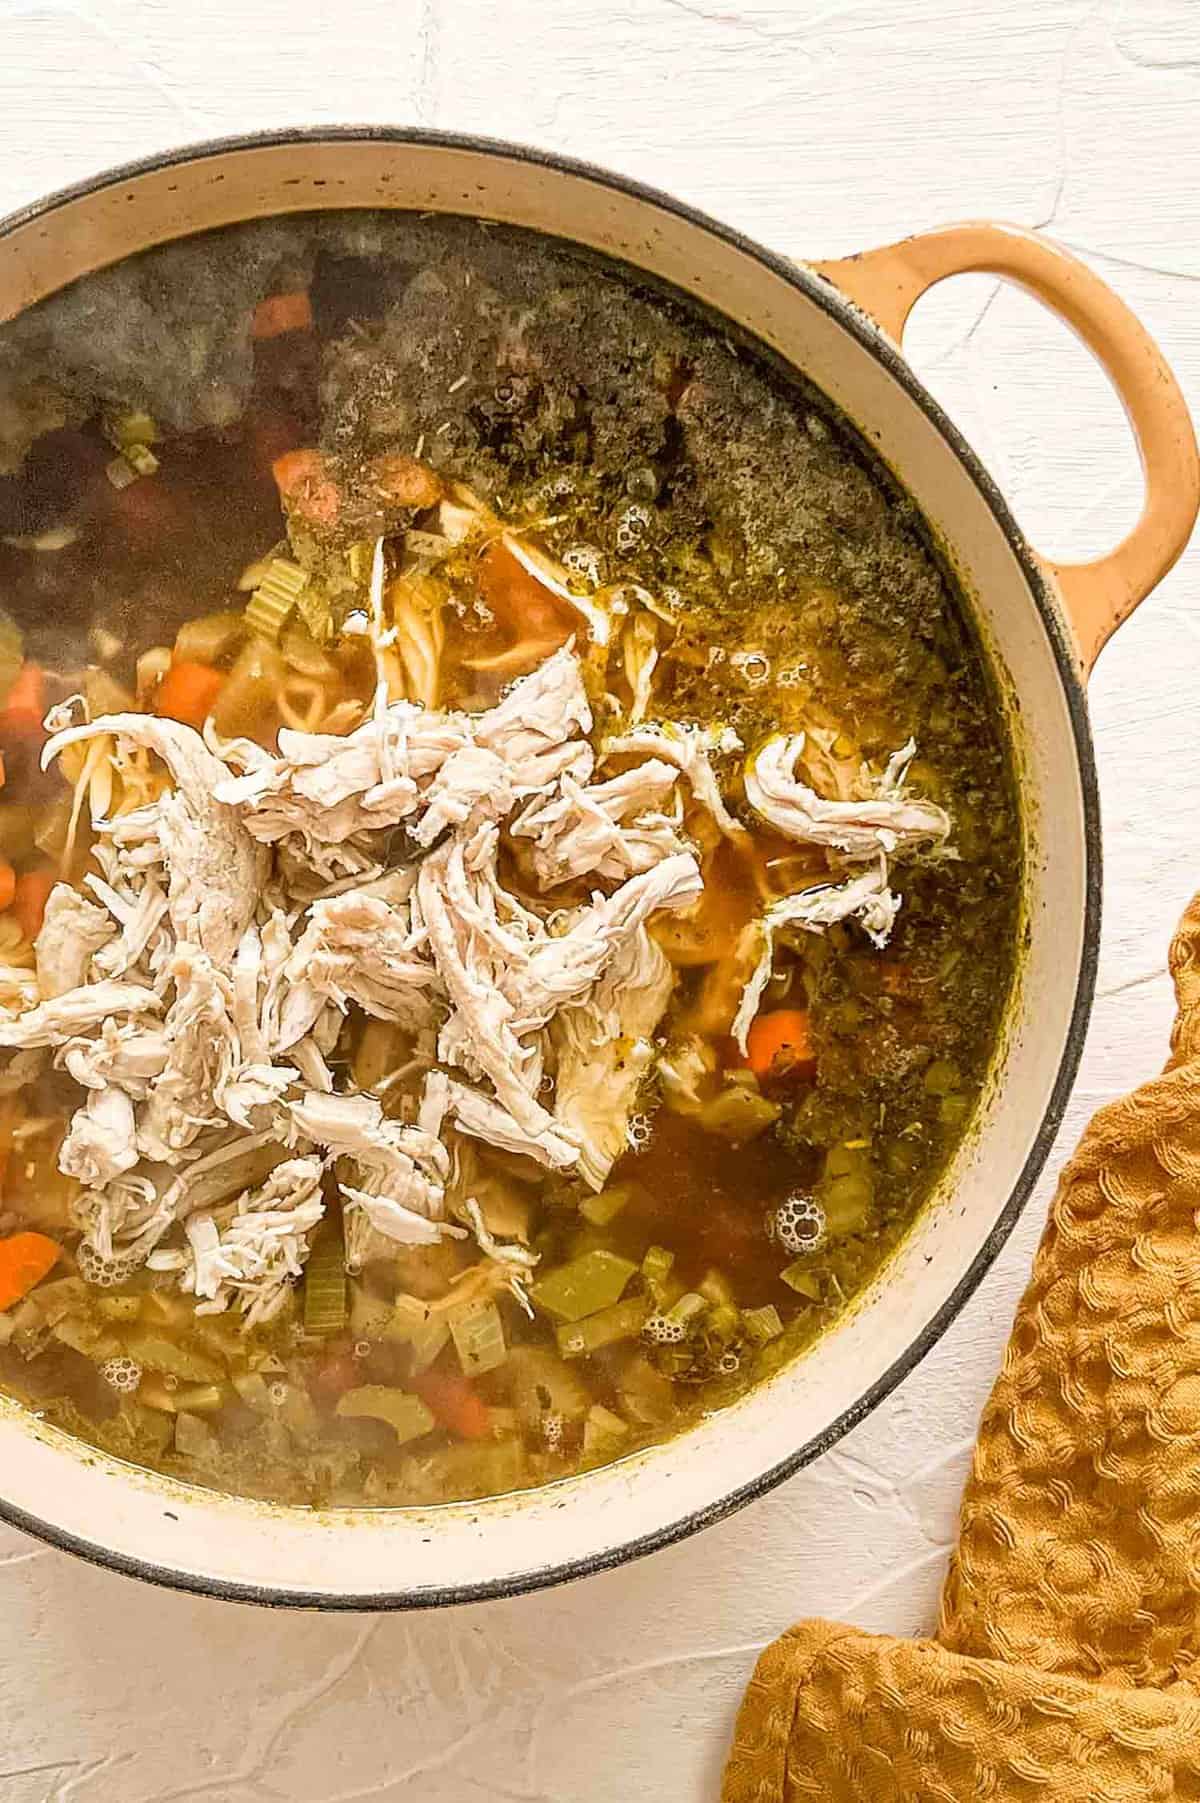 Shredded chicken added into a post of chicken noodle soup.